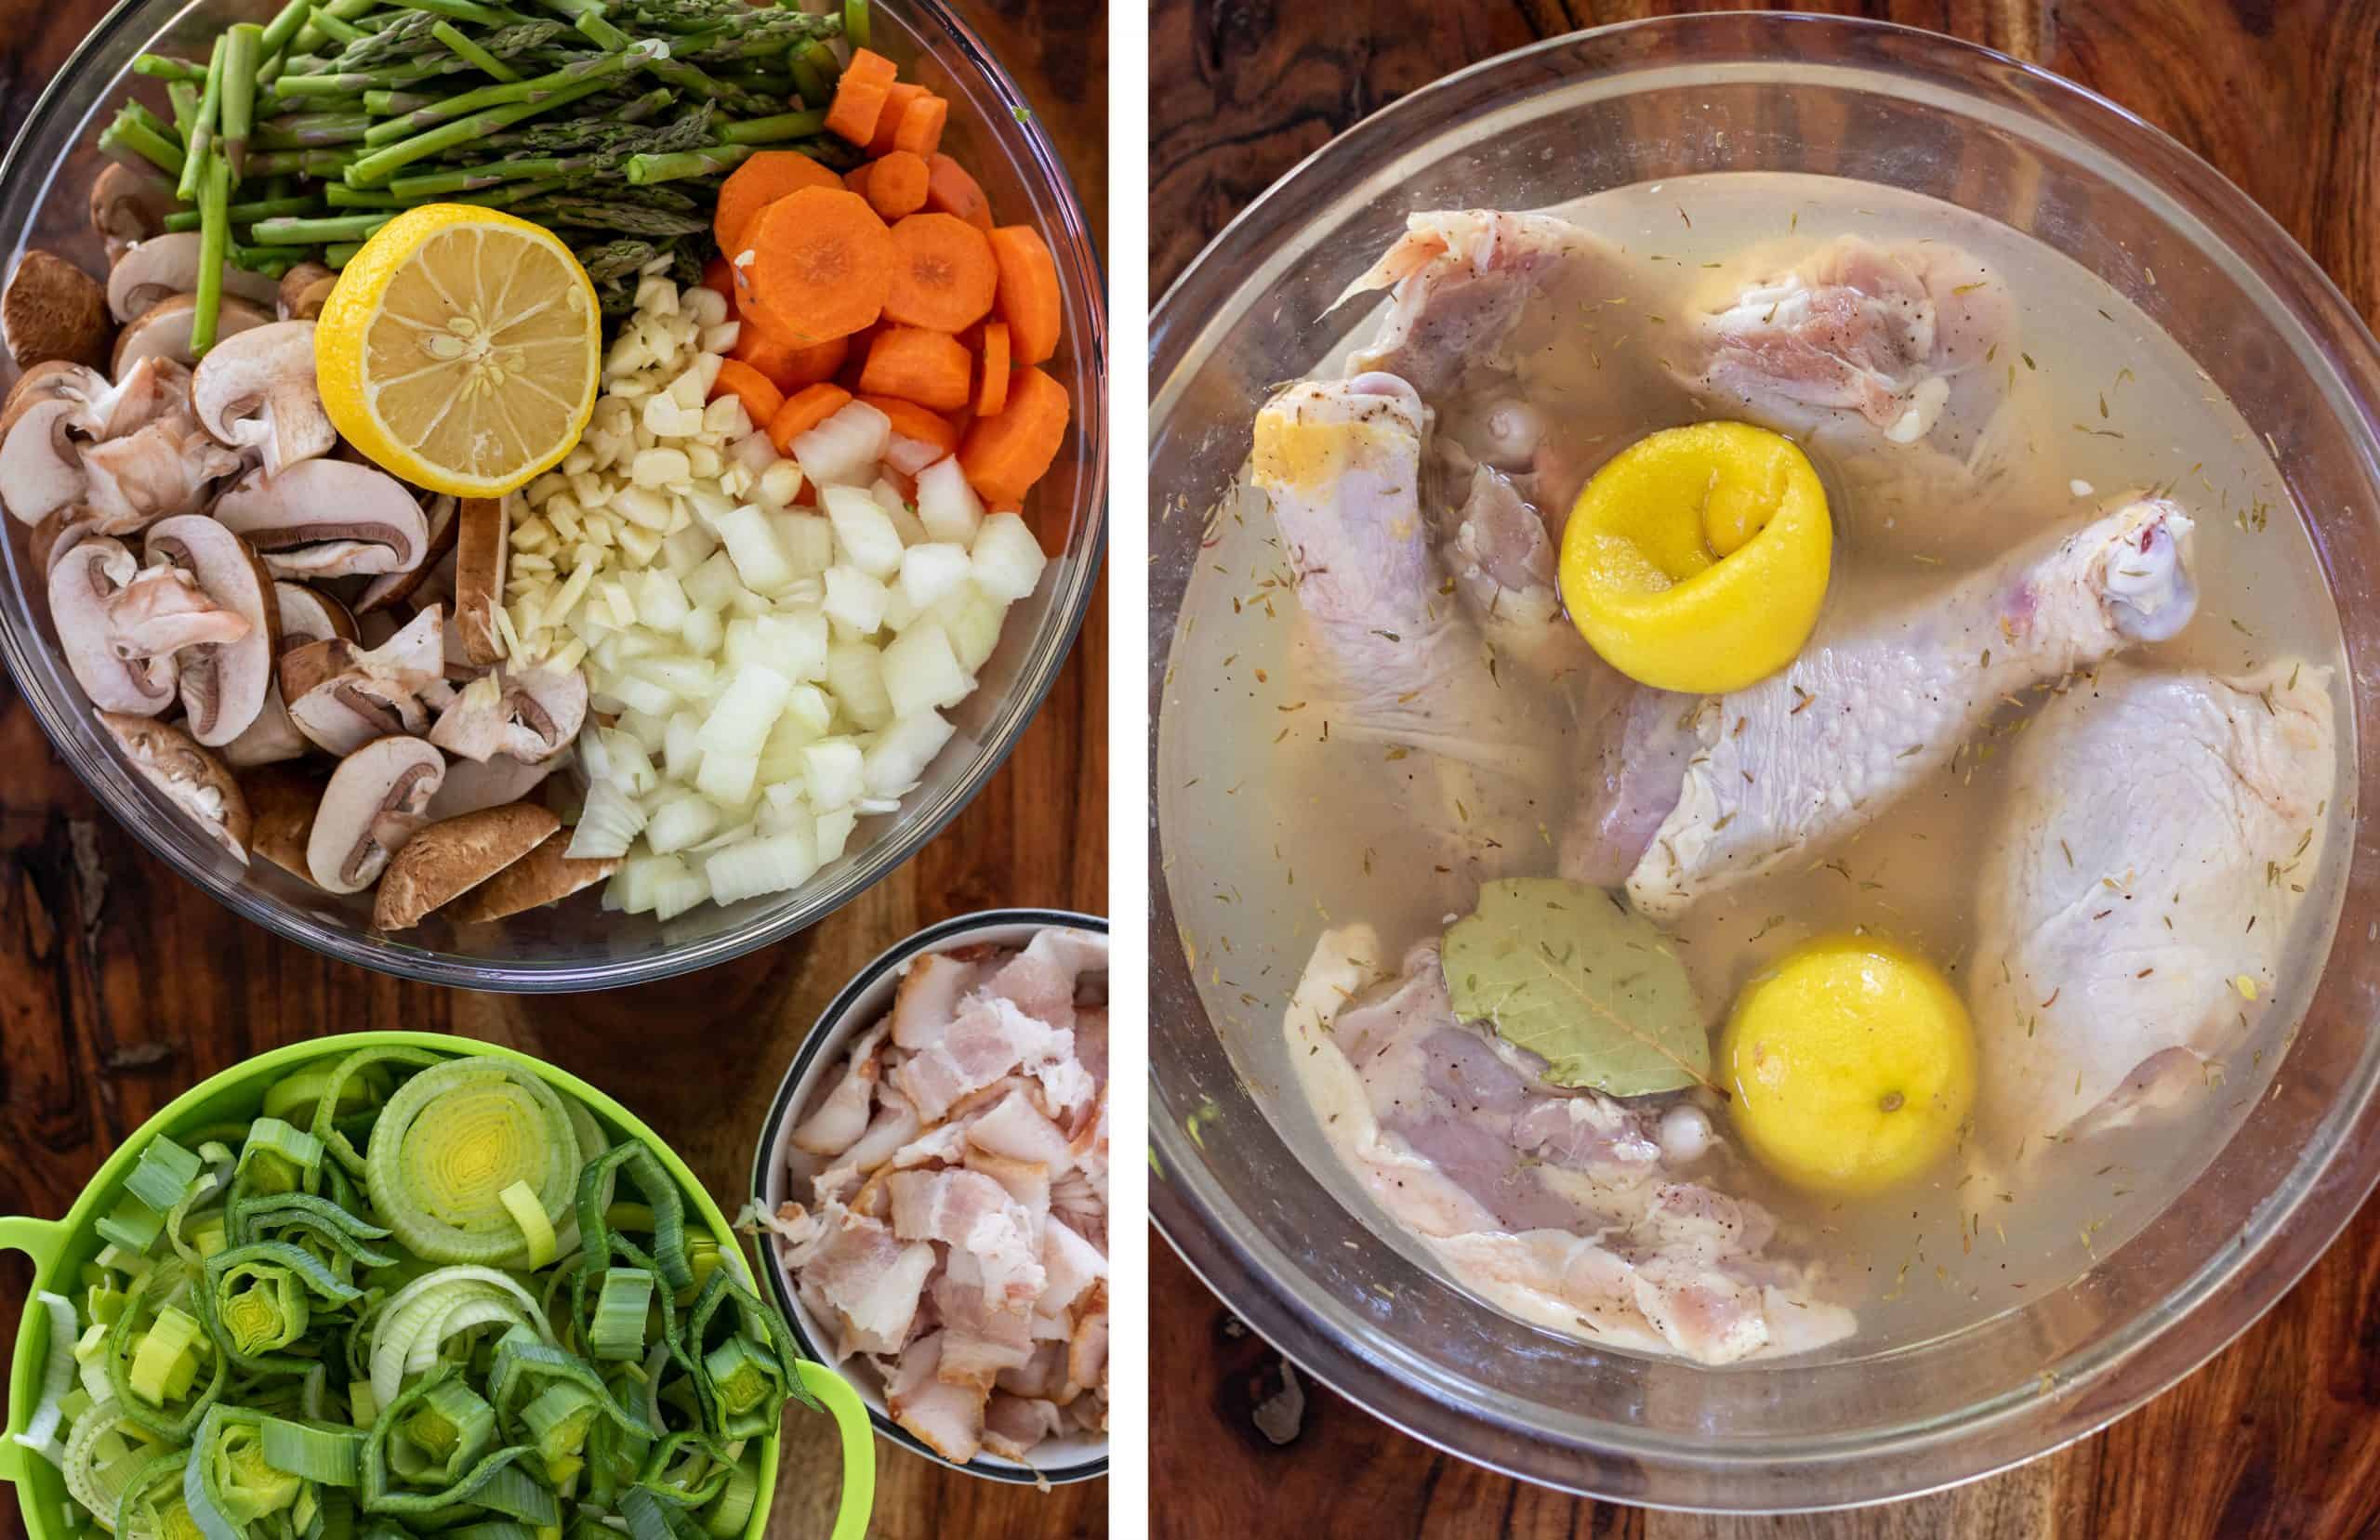 Two side by side pictures, the first one has a bowl of ingredients for coq au vin like leeks and bacon, the secon is a large glass bowl of marinating chicken with lemon and herbs